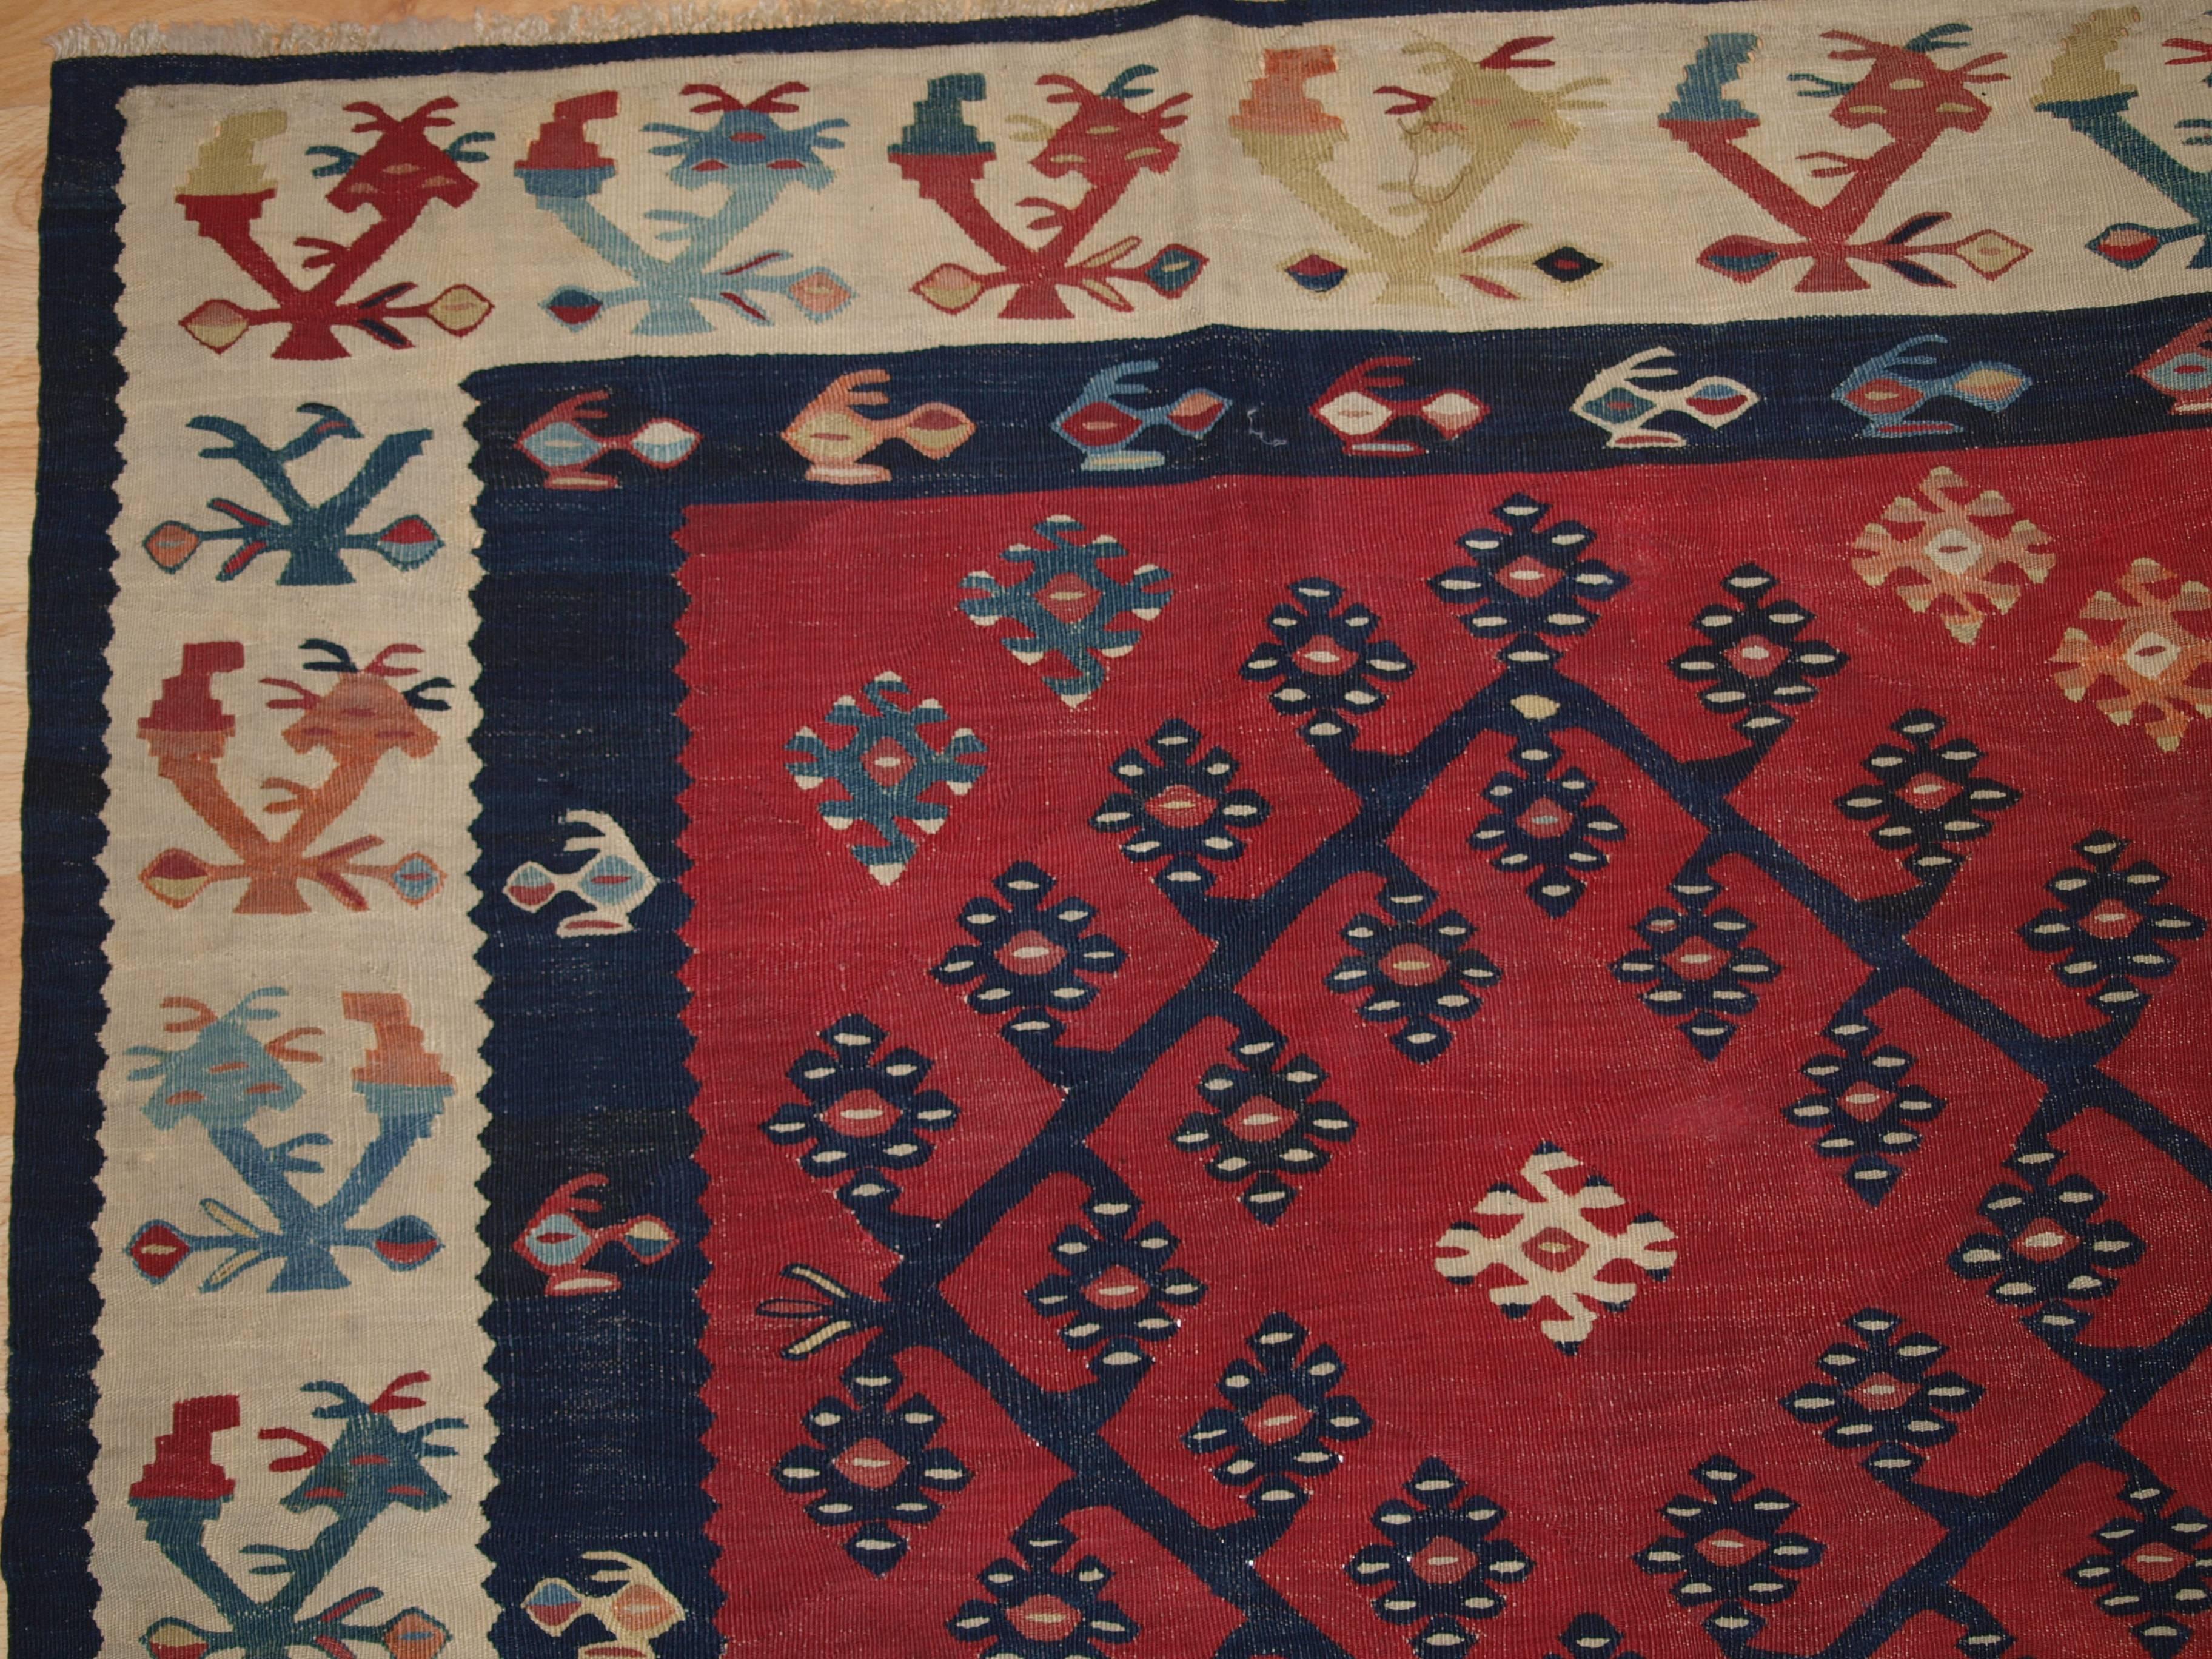 Antique Anatolian Sharkoy Kilim, Western Turkey, 19th Century In Excellent Condition For Sale In Moreton-in-Marsh, GB